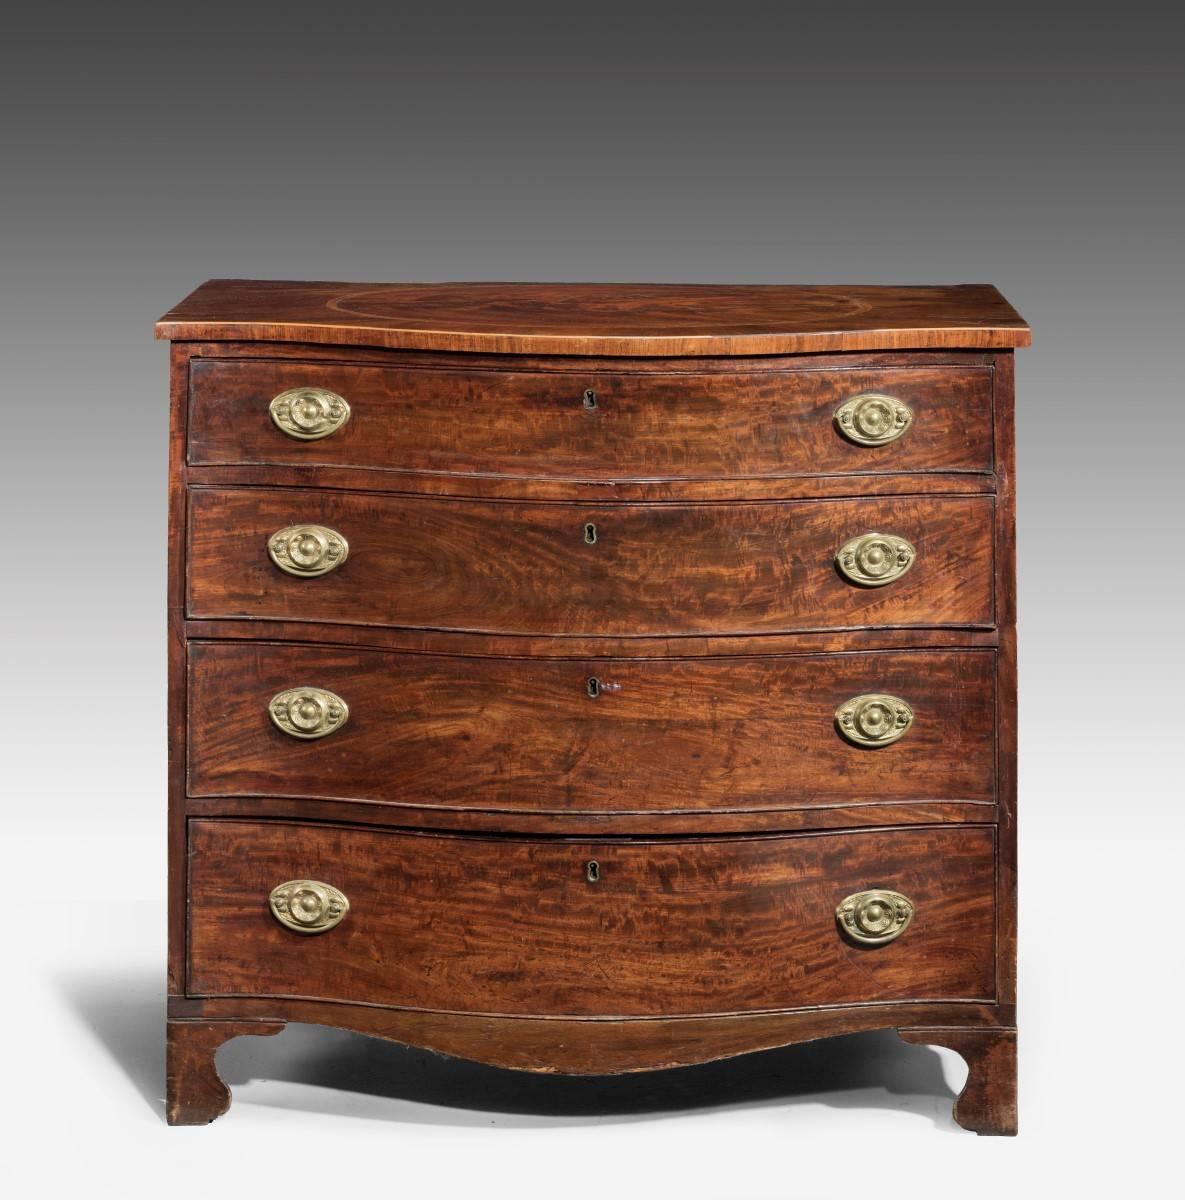 An attractive and well figured George III serpentine mahogany commode on shaped bracket feet. The top quartered and finely inlaid, with a contrasting oval centre within a Kingwood border. Period replaced handles.